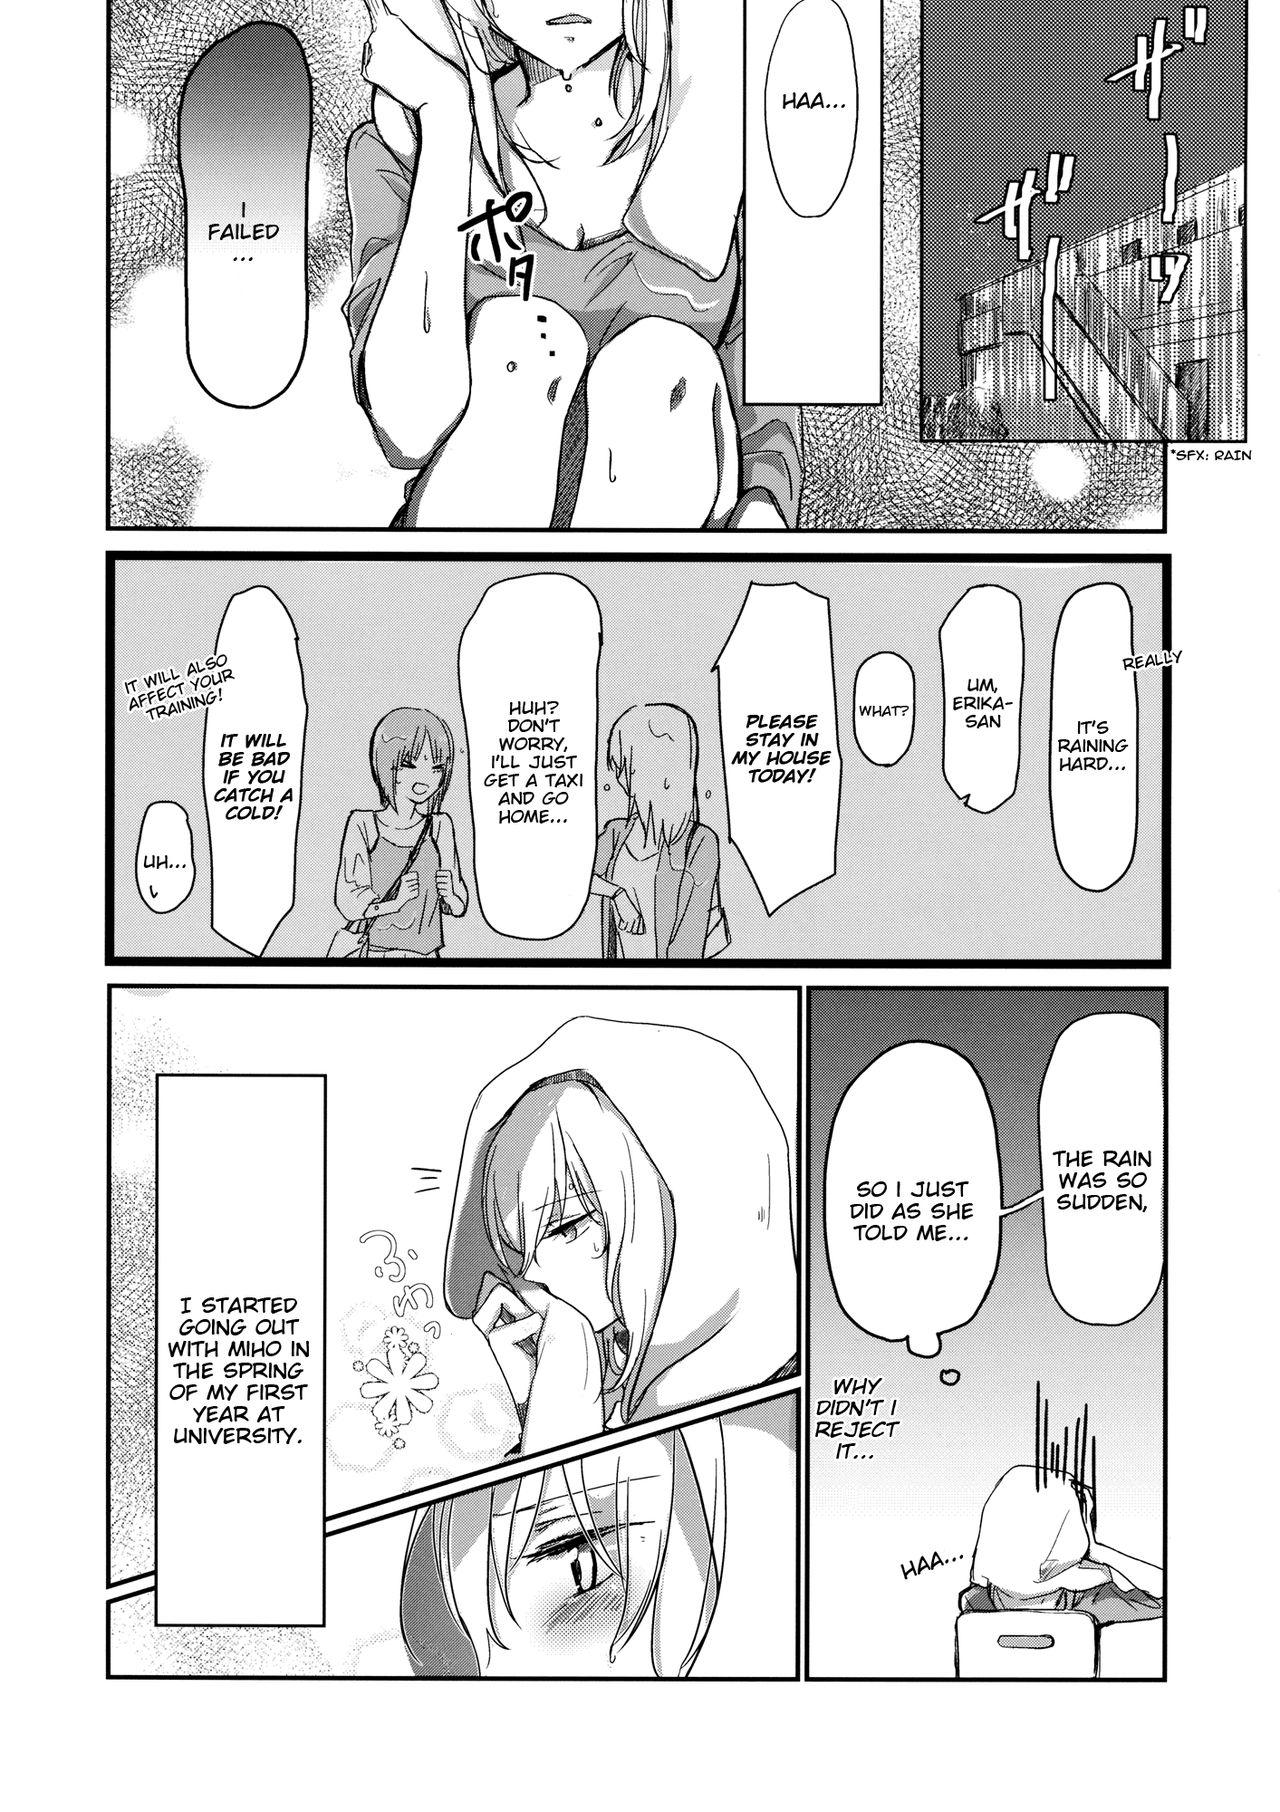 Teenage Porn for the first time - Girls und panzer Dildos - Page 3